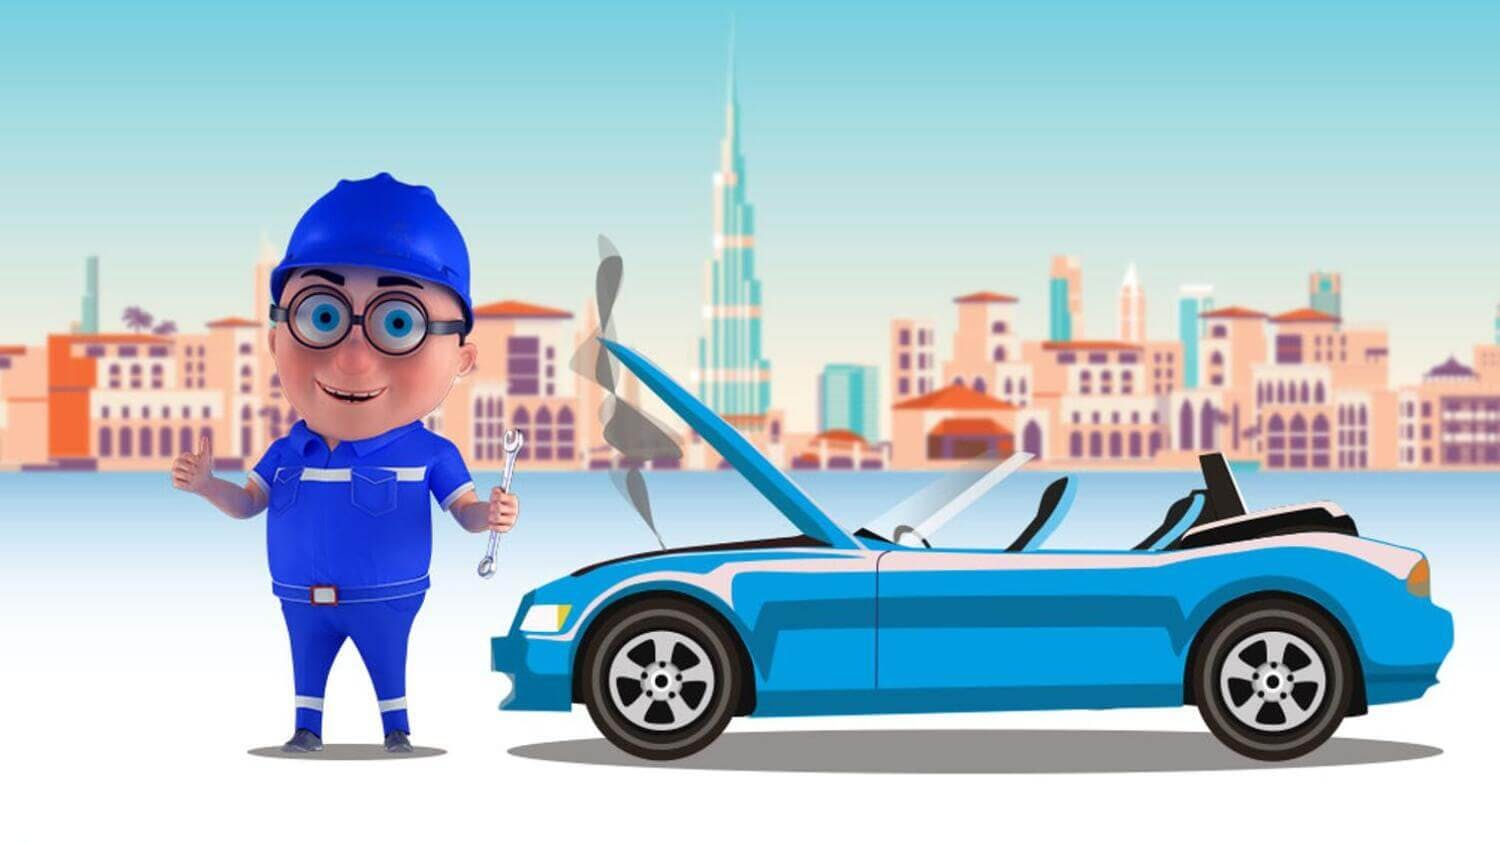 Be car 'summer smart' with InsuranceMarket.ae